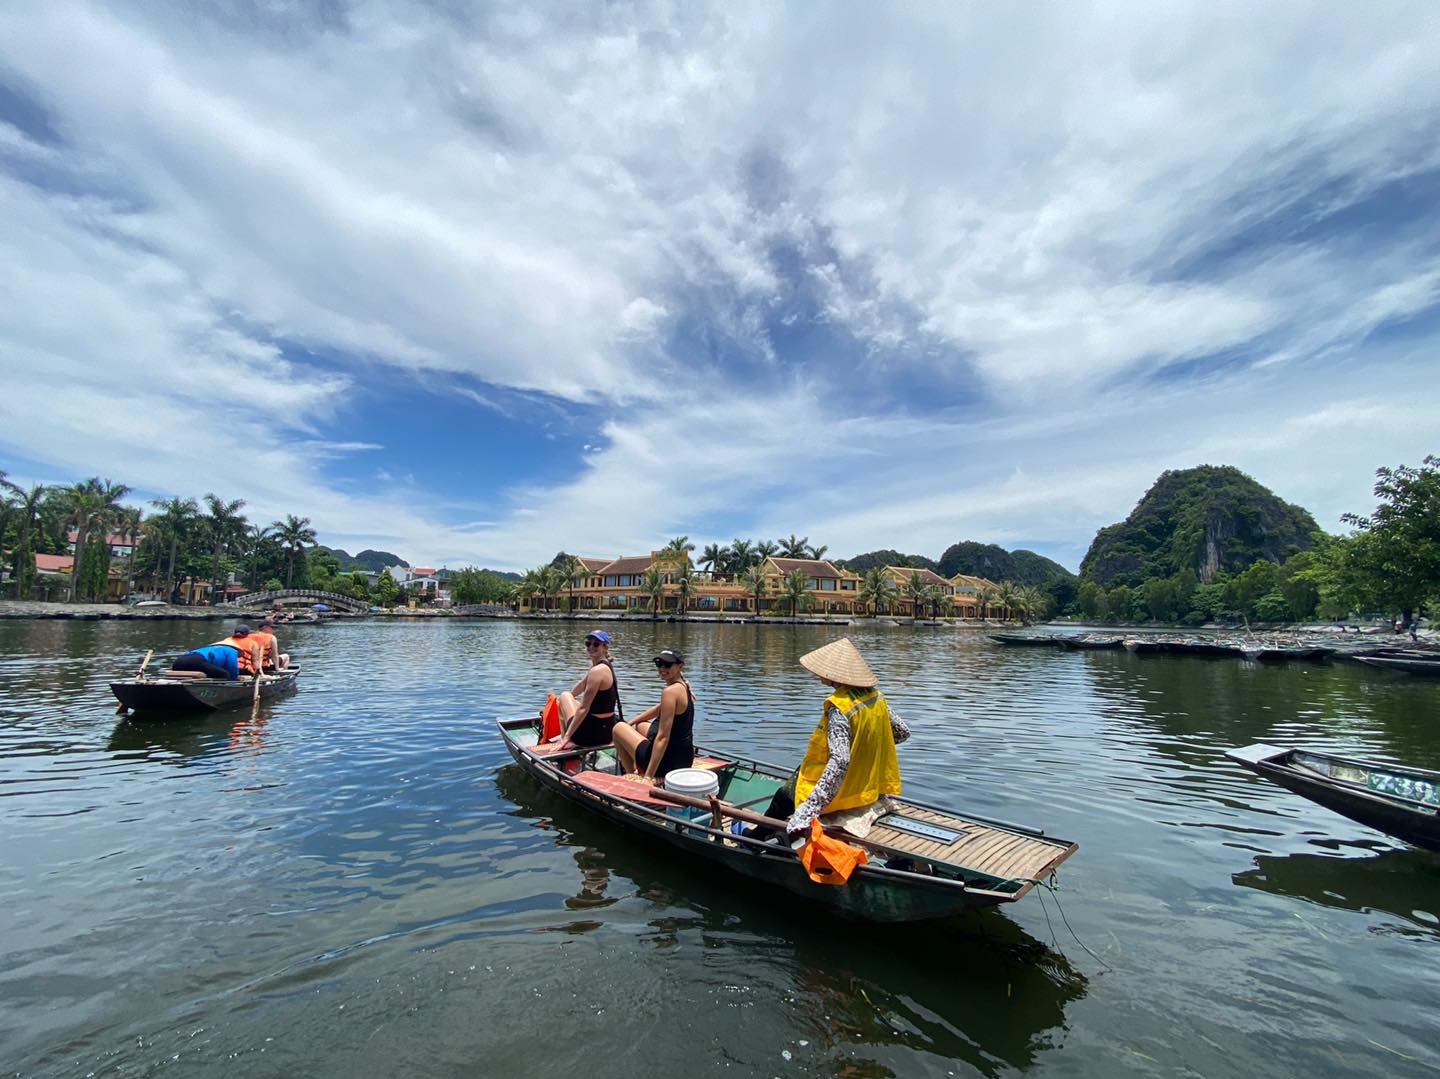 Tips to maximize your boat ride experience in Tam Coc